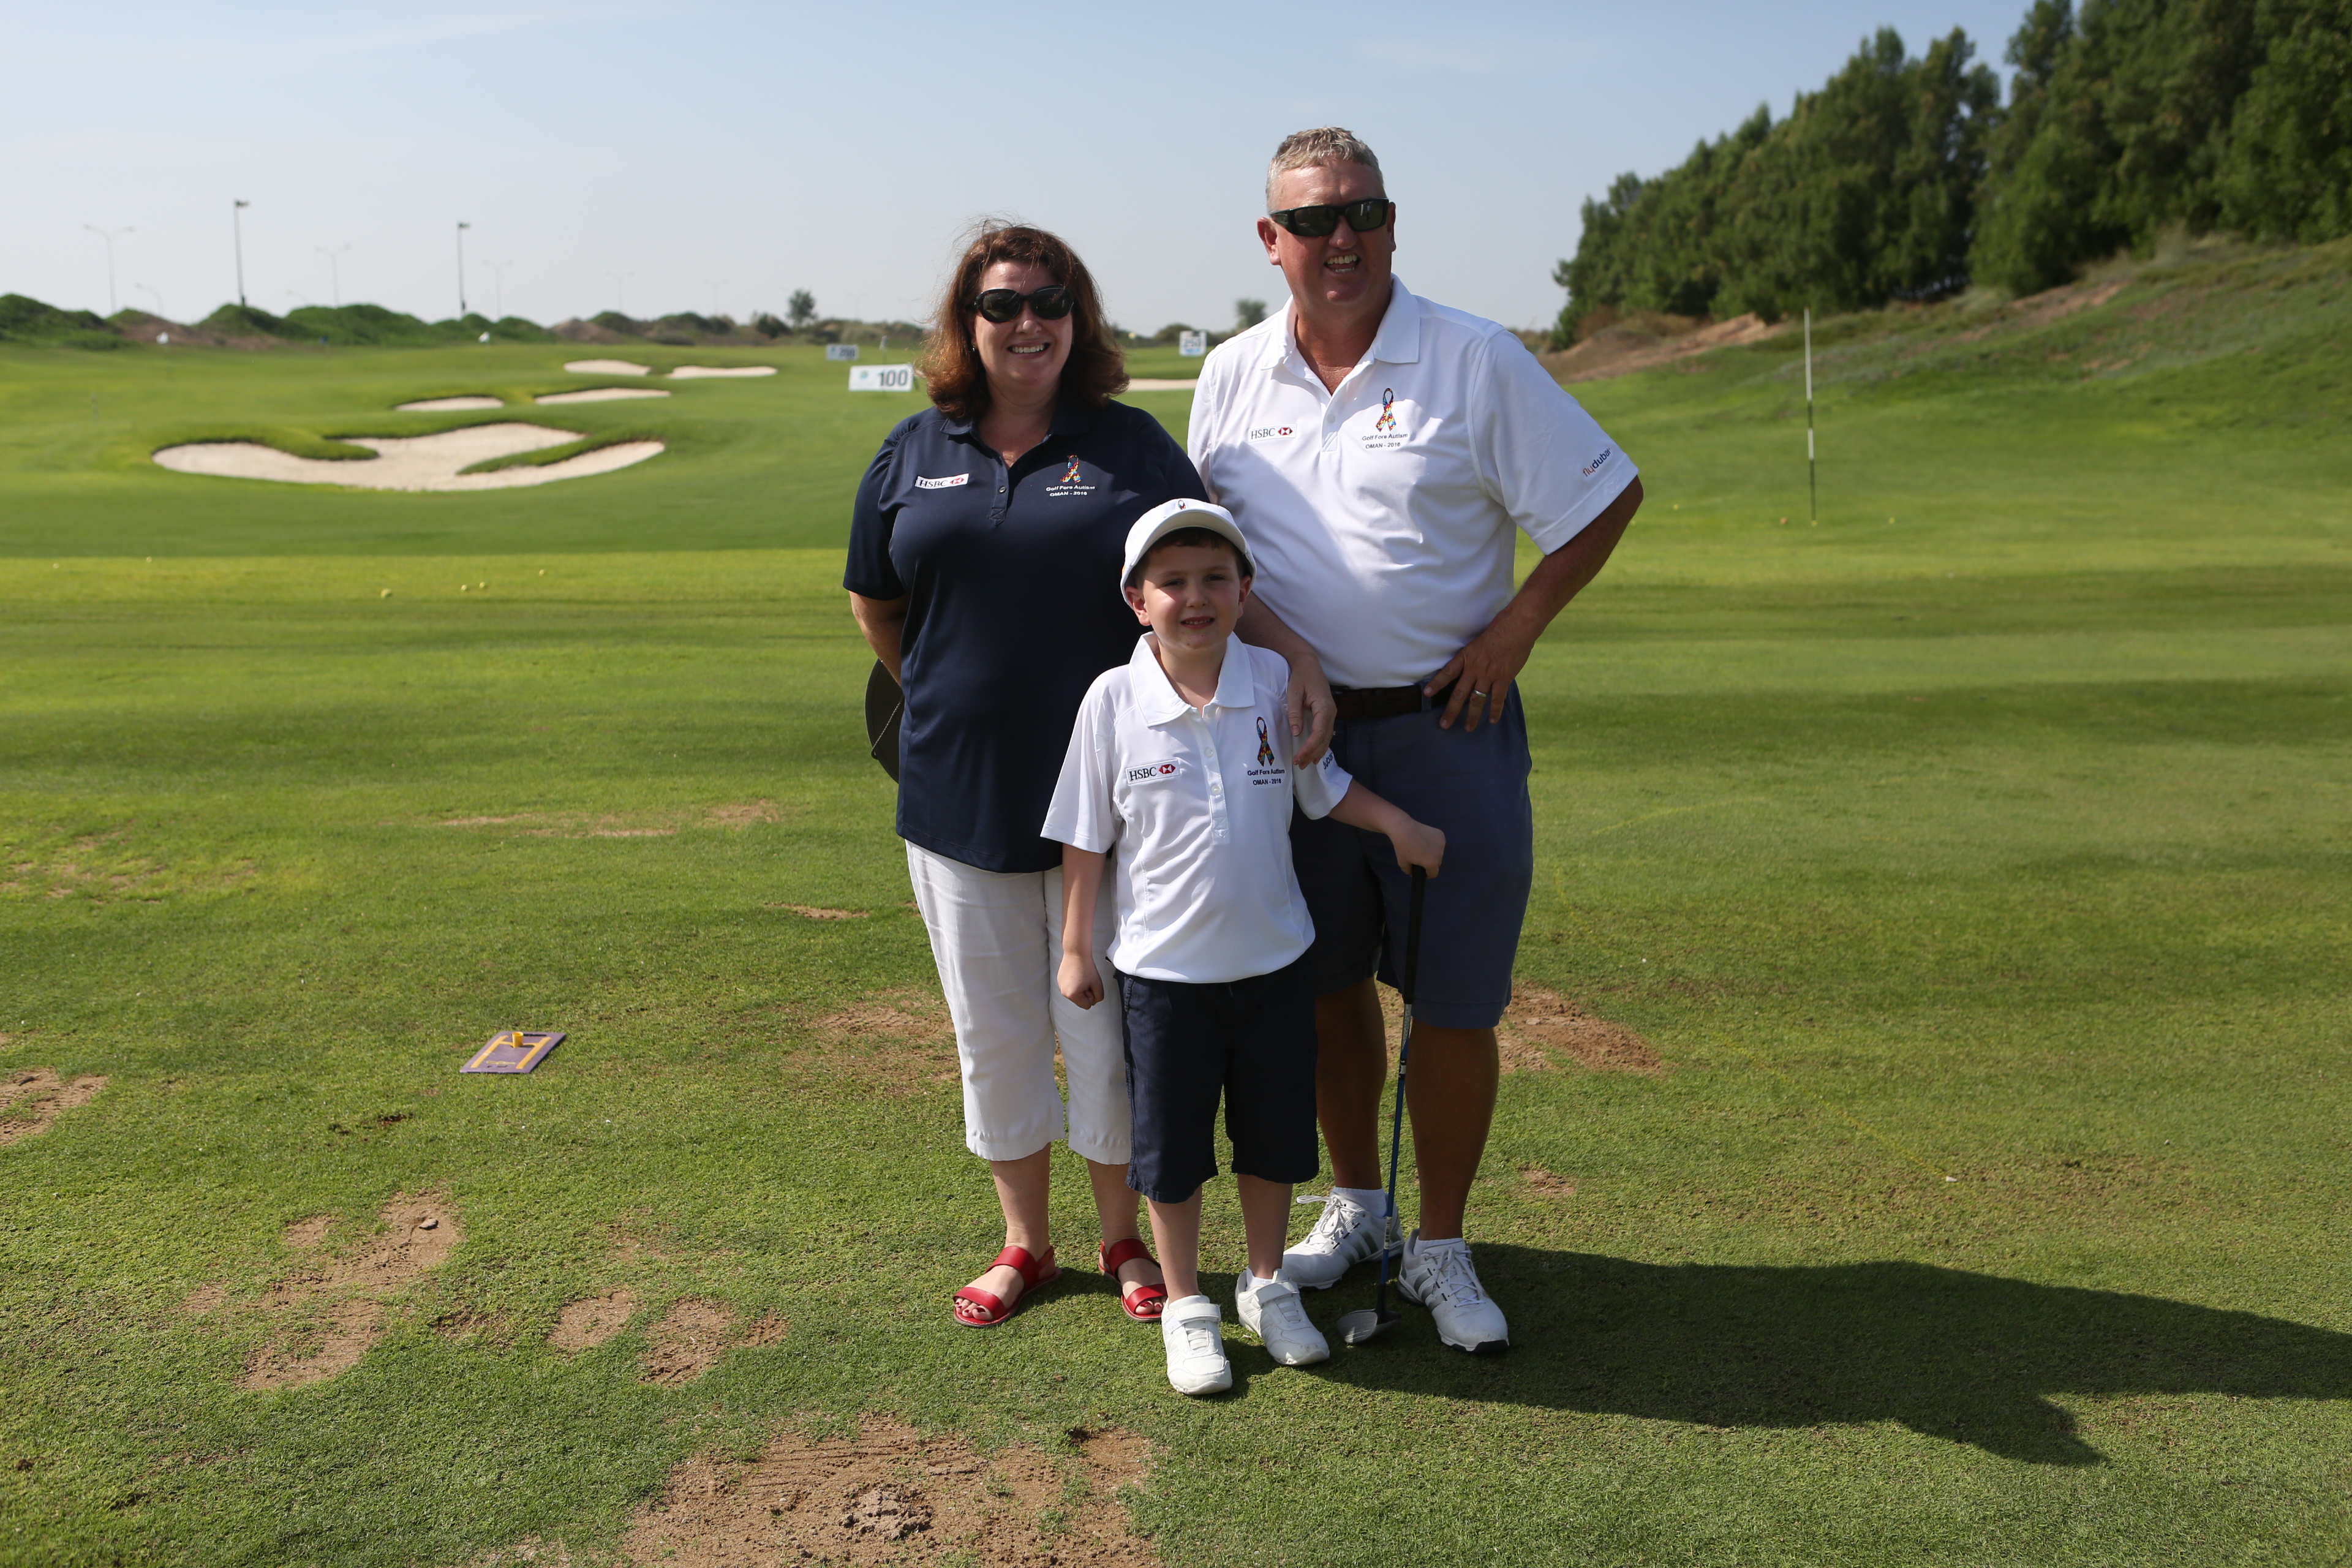 Muscat Parent: Seven-year-old Lachlan overcoming autism is an inspiration for us all